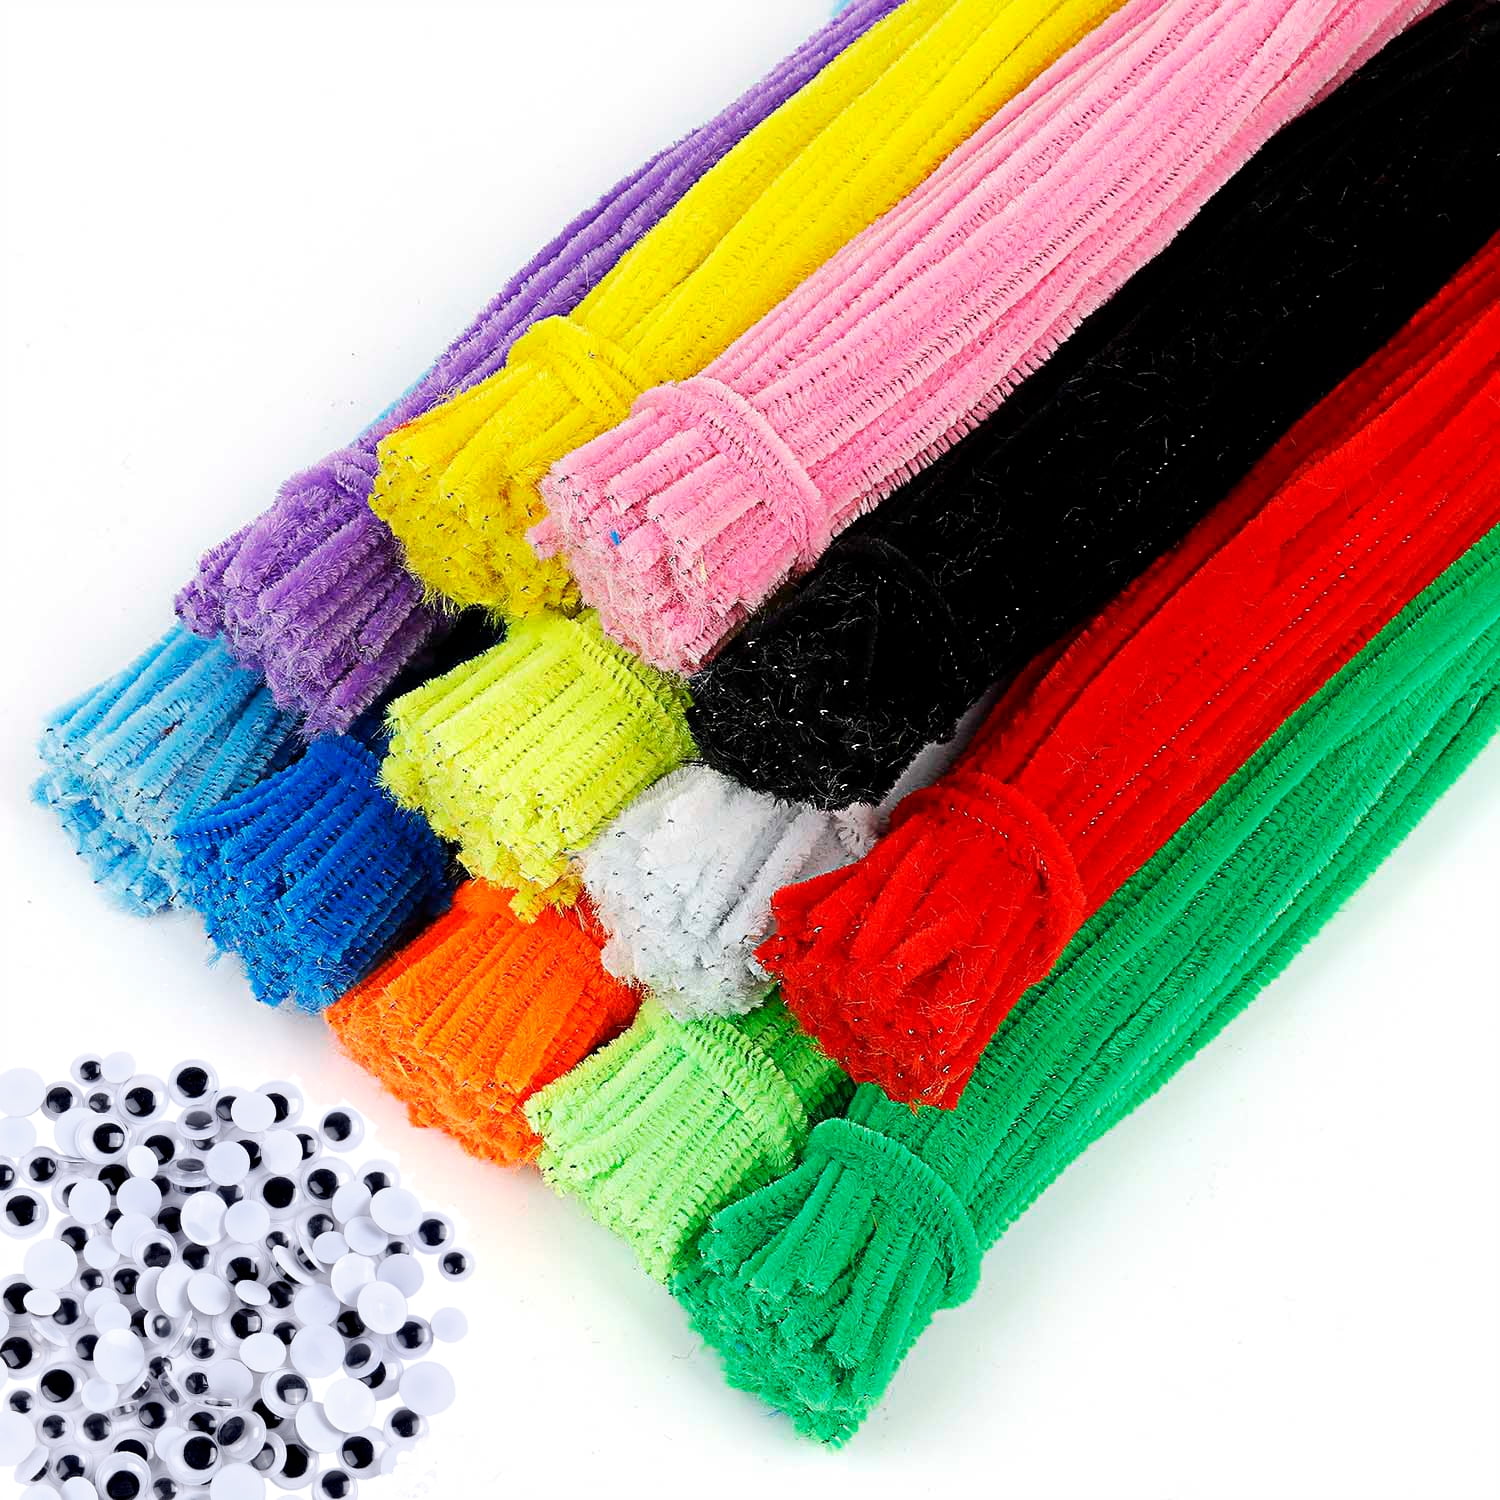 Buy Colored Pipe Cleaners, Colored Pipe Cleaners Pastel 100pk, Where to Buy  Pipe Cleaners, Where Can You Buy Pipe Cleaners, What is a Chenille Stem,  Kids Crafts with Pipe Cleaners: Victoria, Australia